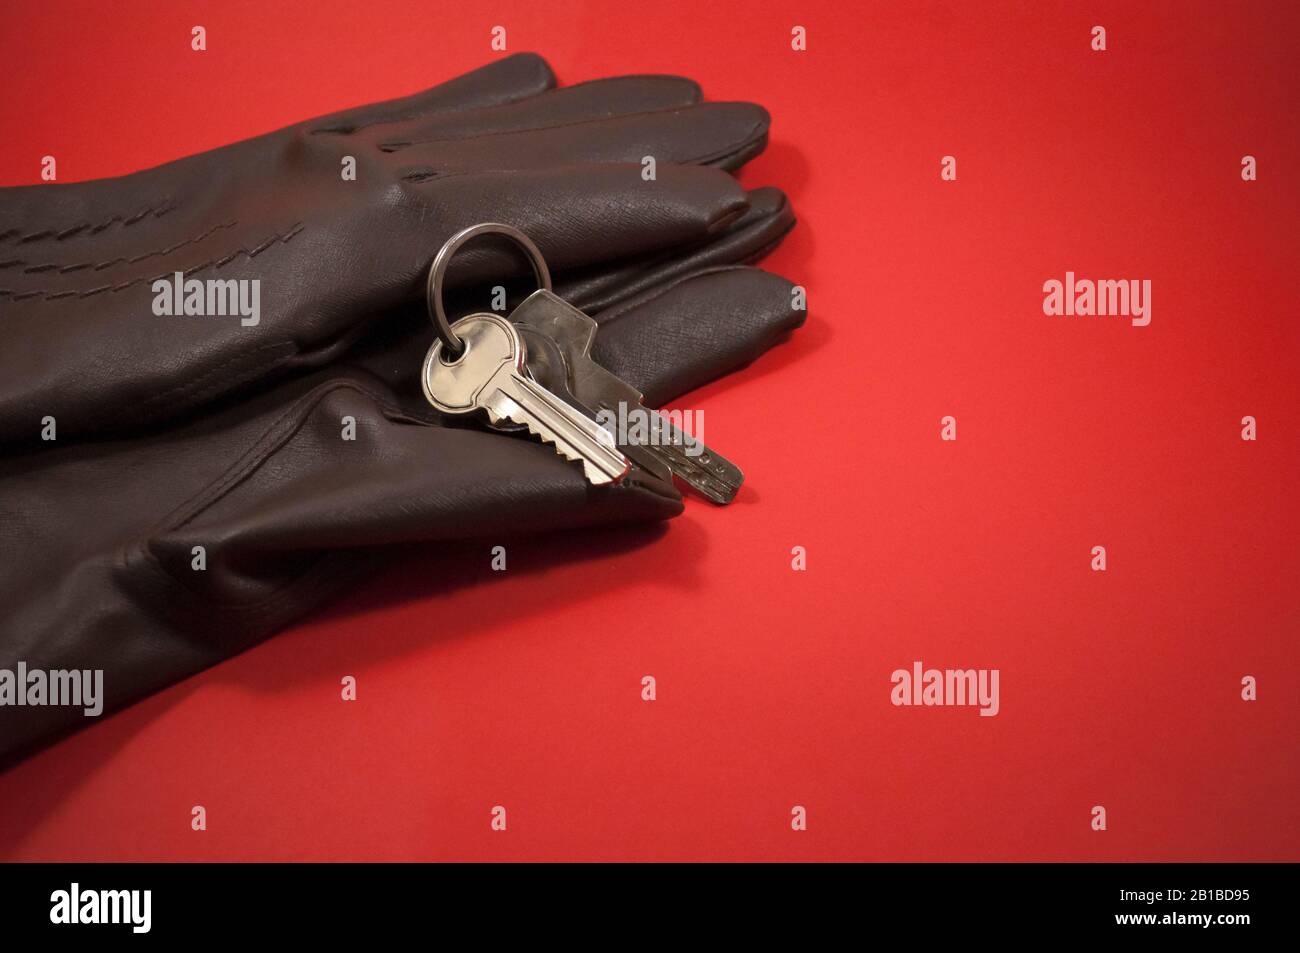 depicts gloves and keys on a red background, with space for text Stock Photo